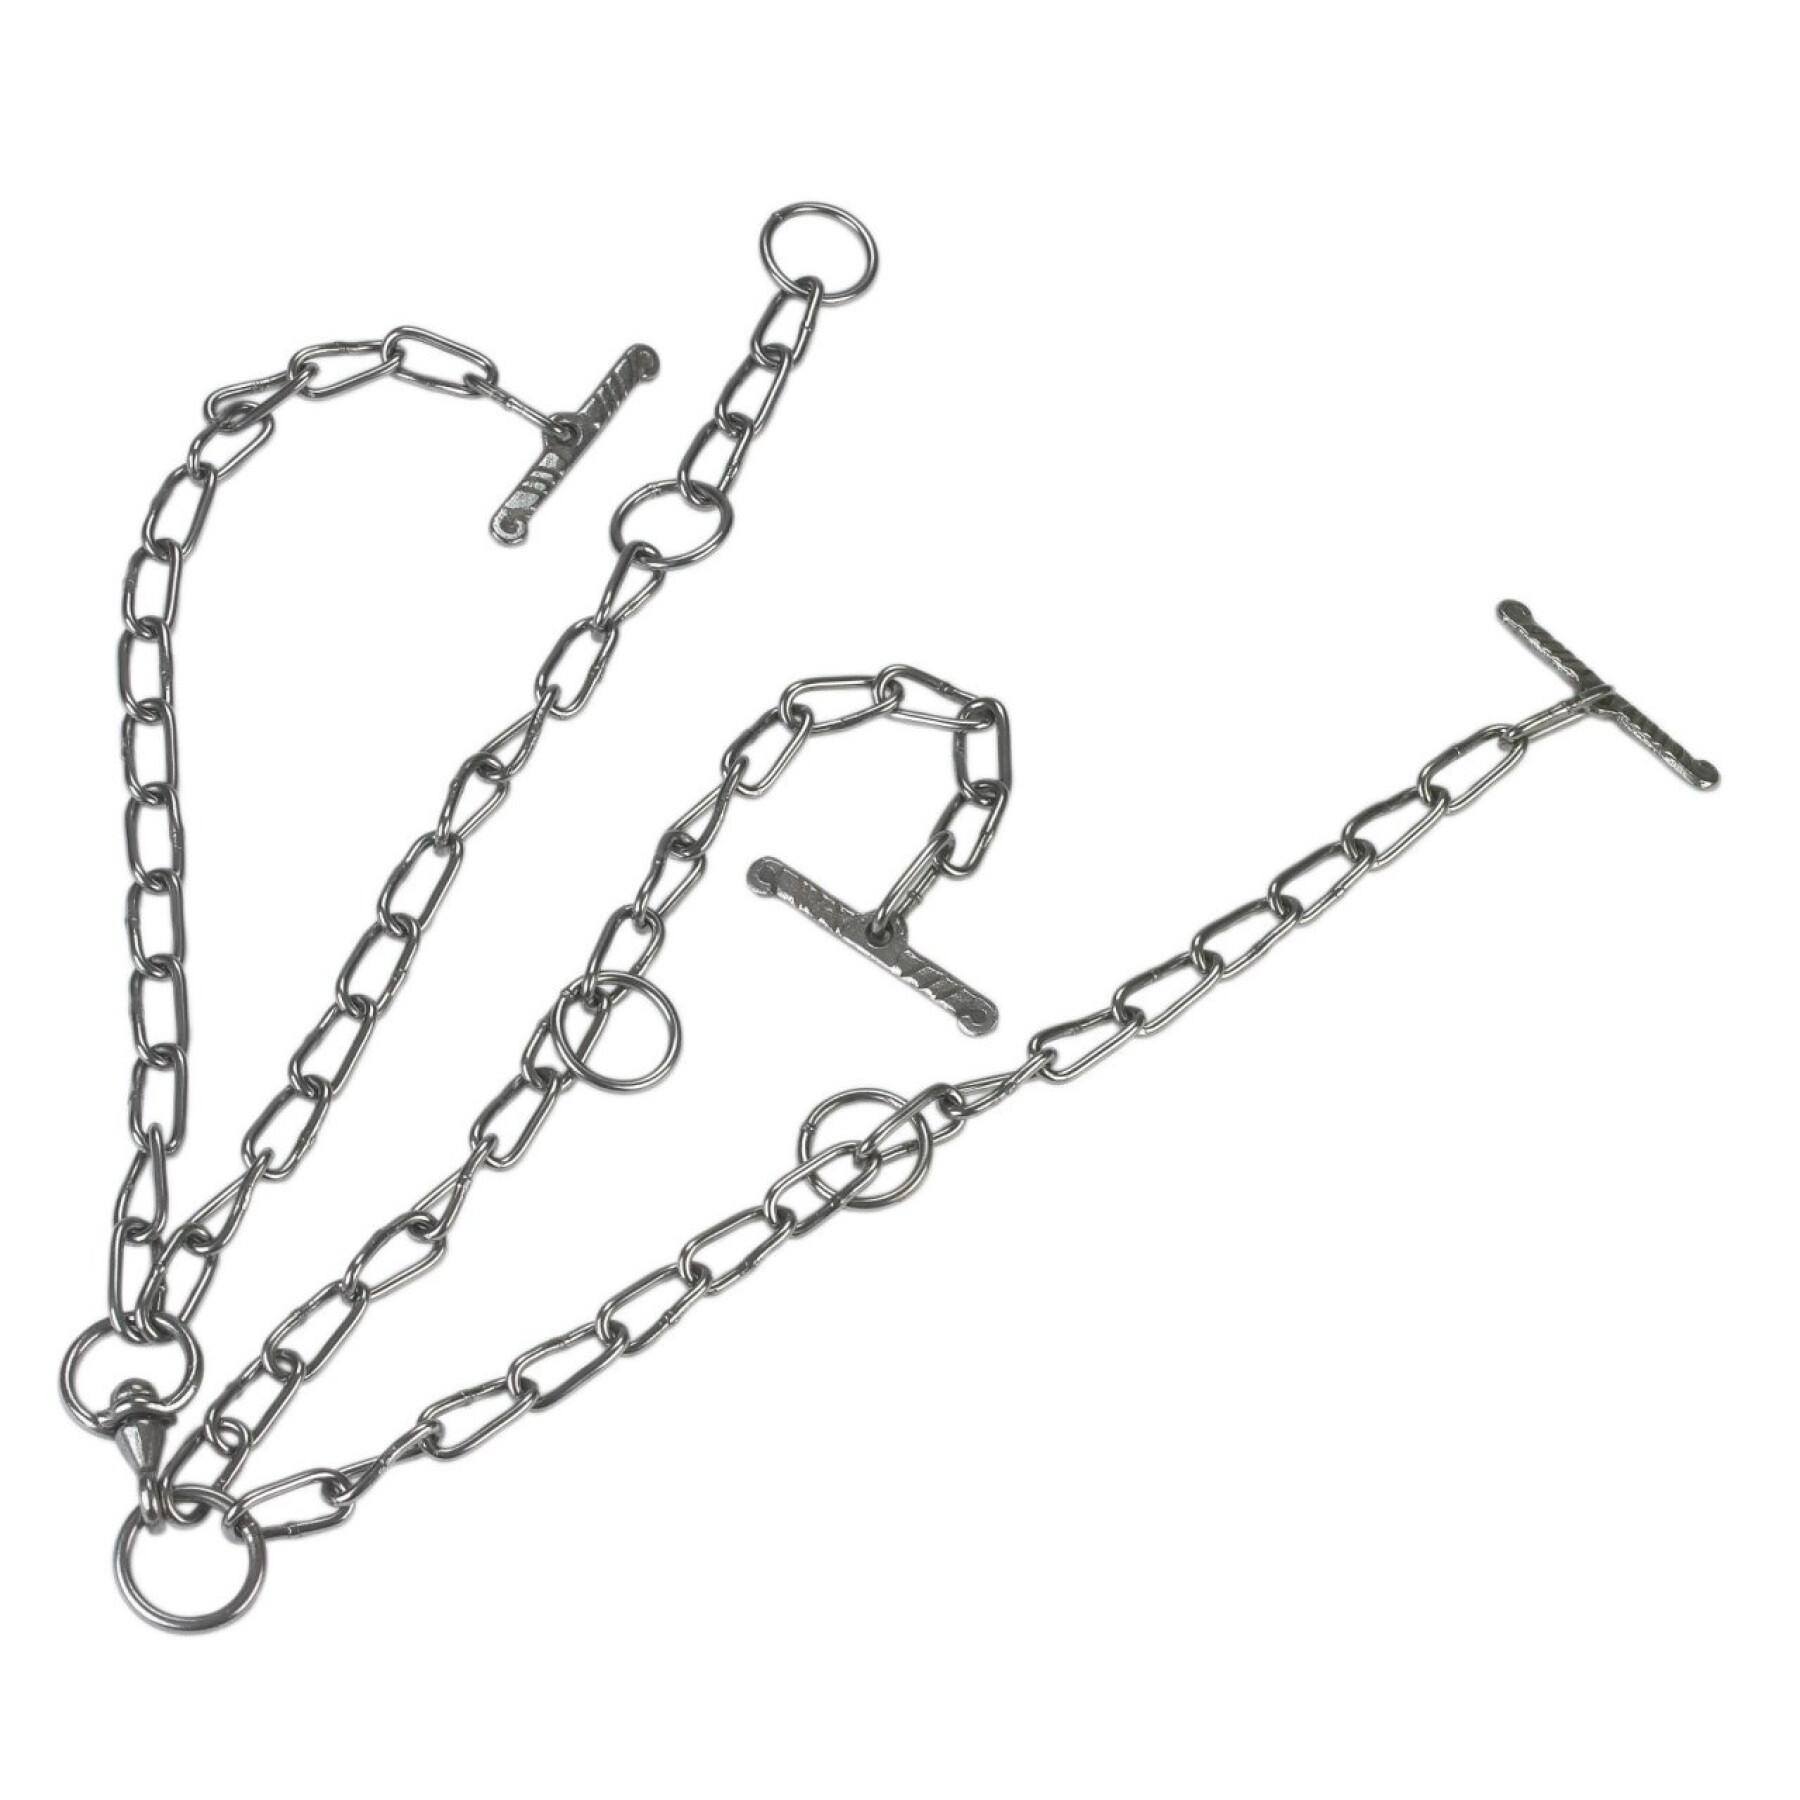 Double zinc-plated cow chain with carabiner Kerbl